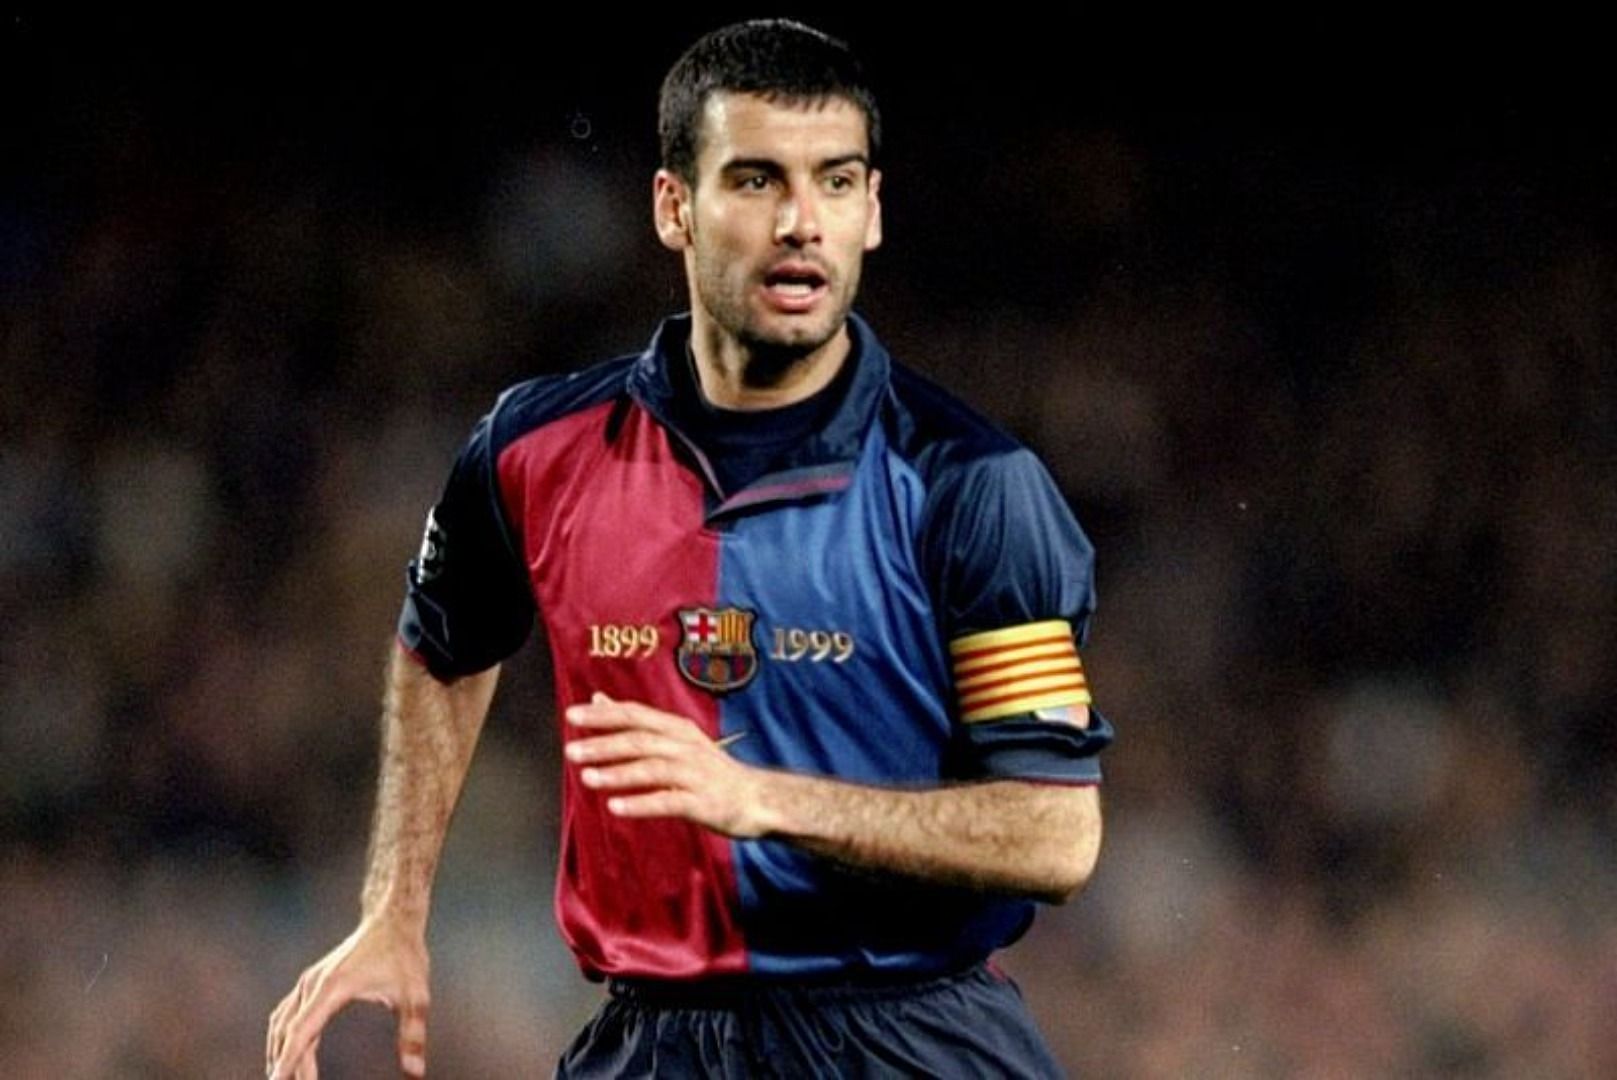 Guardiola had a great playing career before a great managerial one.